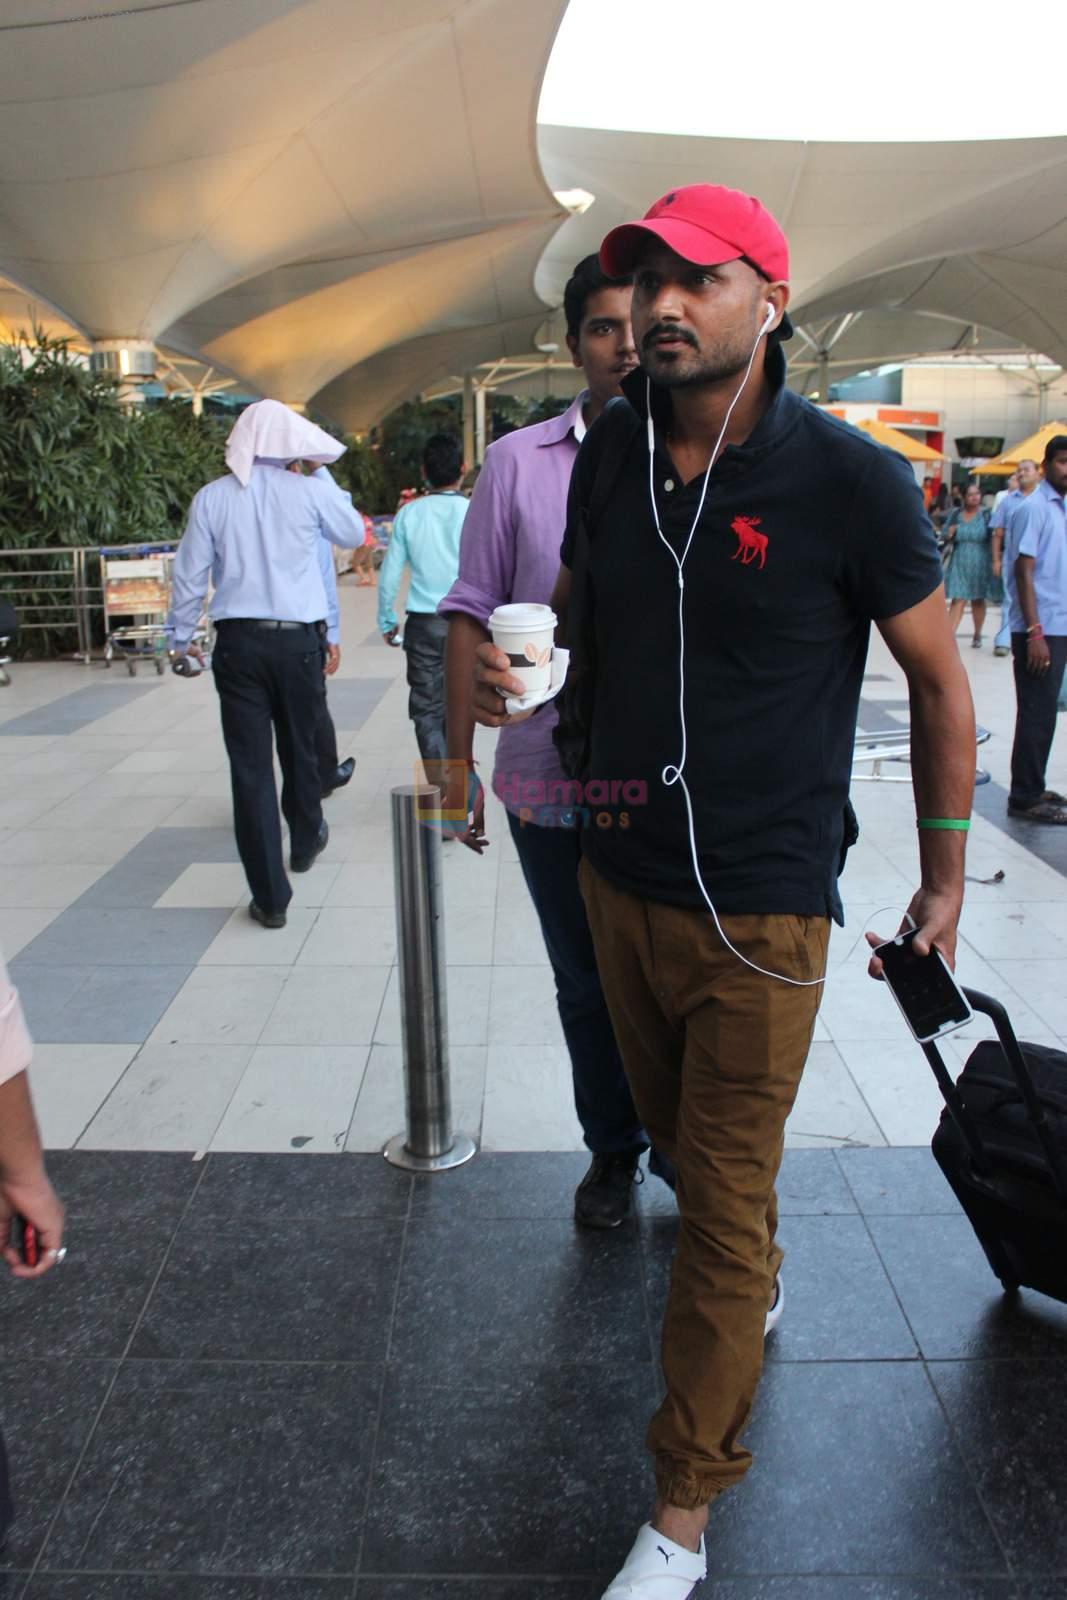 Harbhajan Singh snapped at airport in Mumbai on 7th Sept 2015